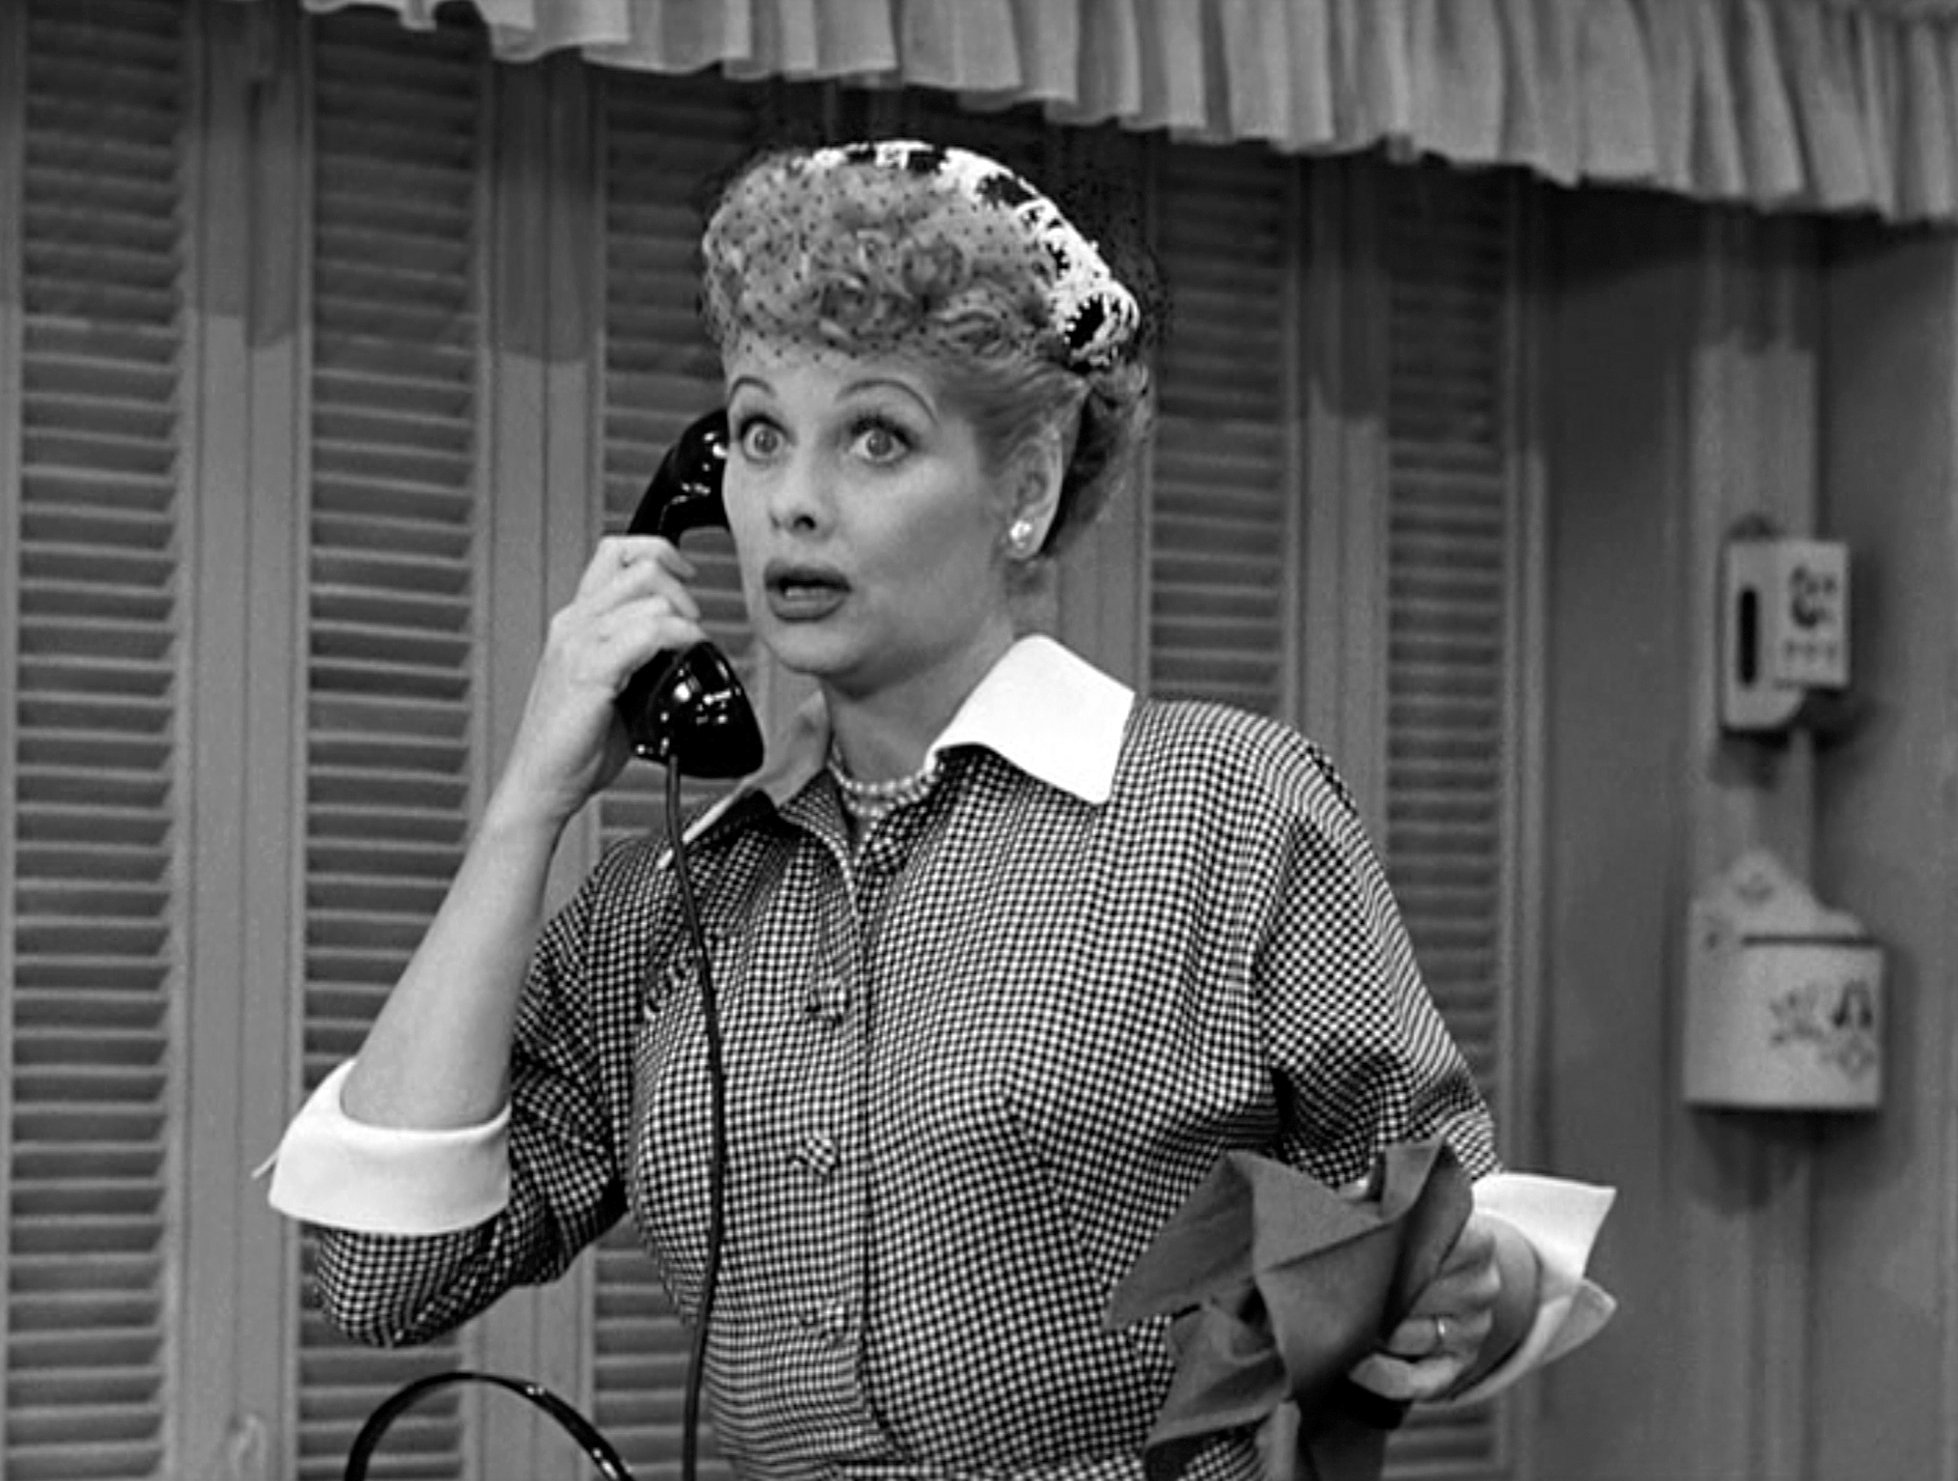 Lucille Ball performing as Lucy Ricardo on the phone in 'I love Lucy'